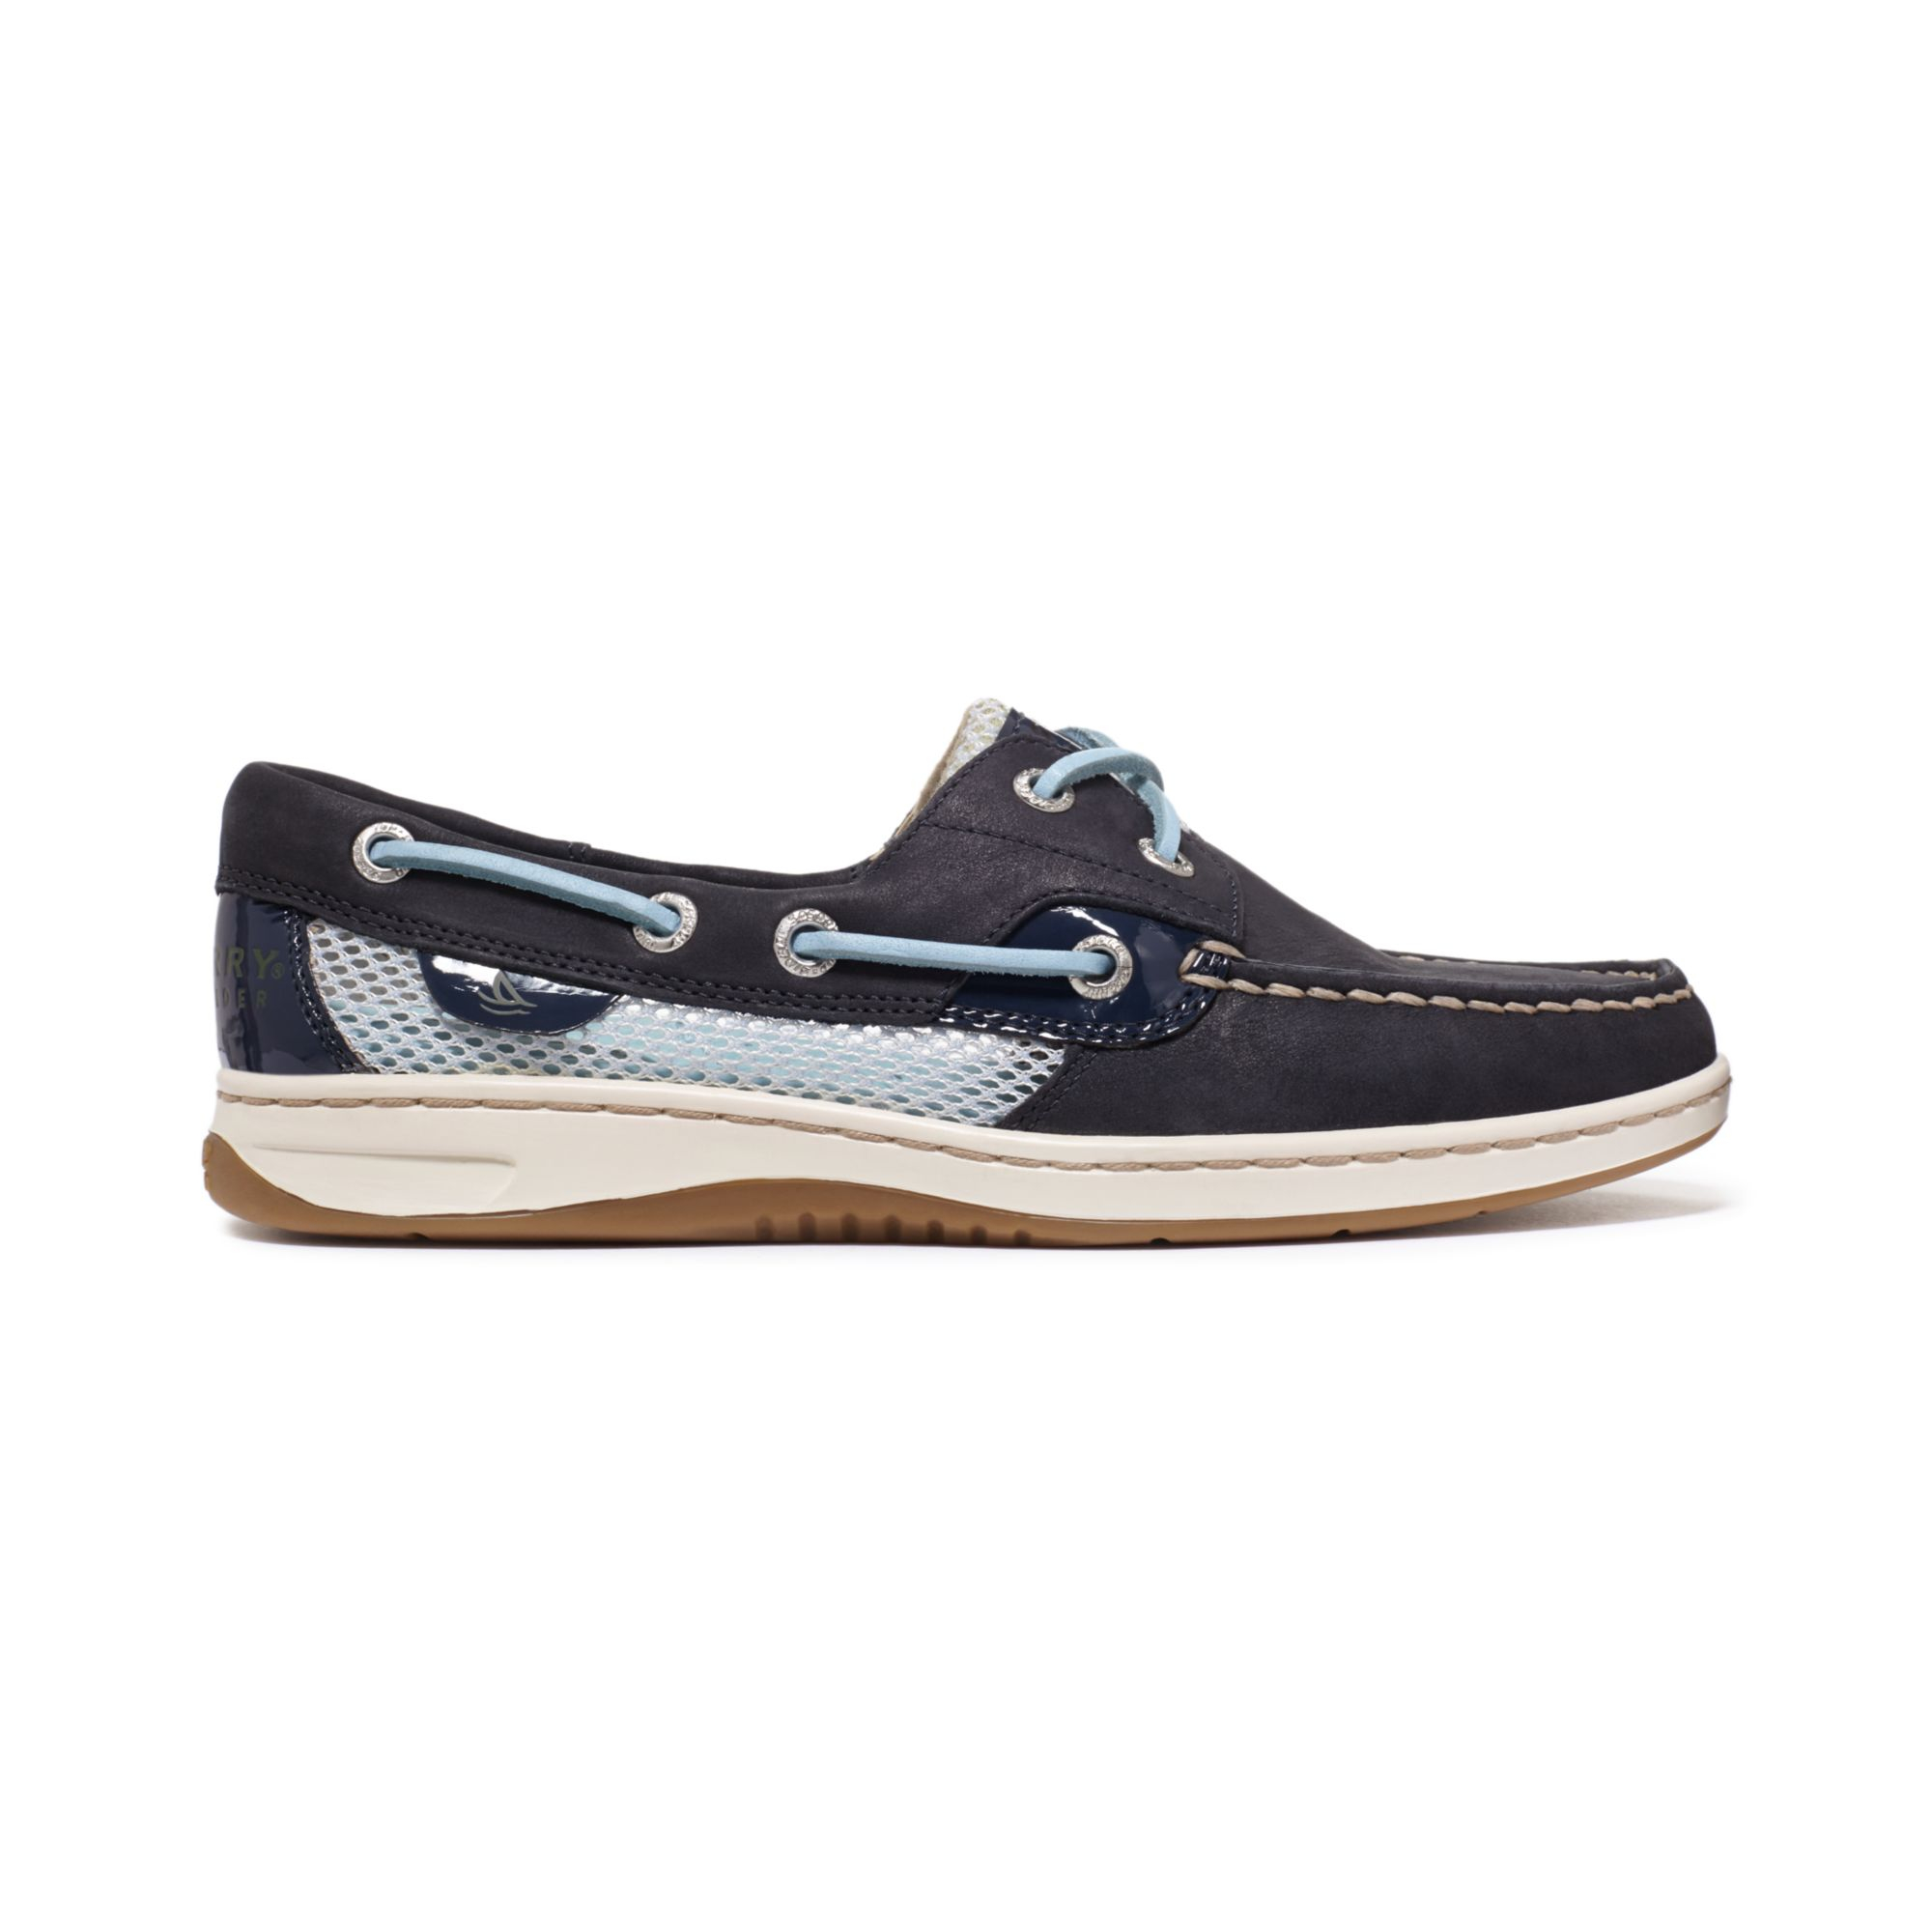 Sperry Top-Sider Womens Bluefish Boat Shoes in Blue - Lyst